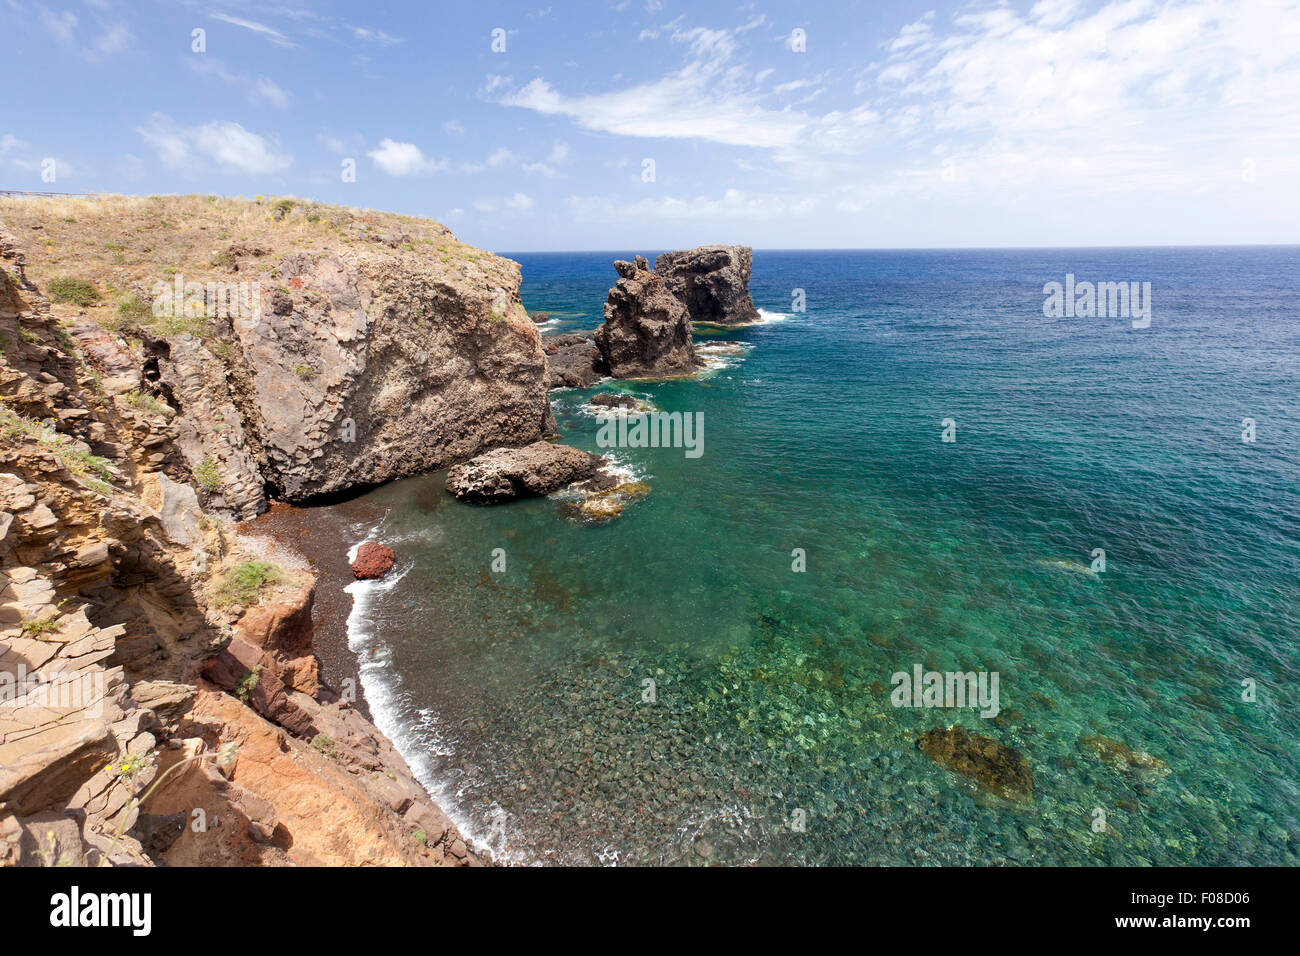 Bay at Ustica Island, Ustica, Italy Stock Photo